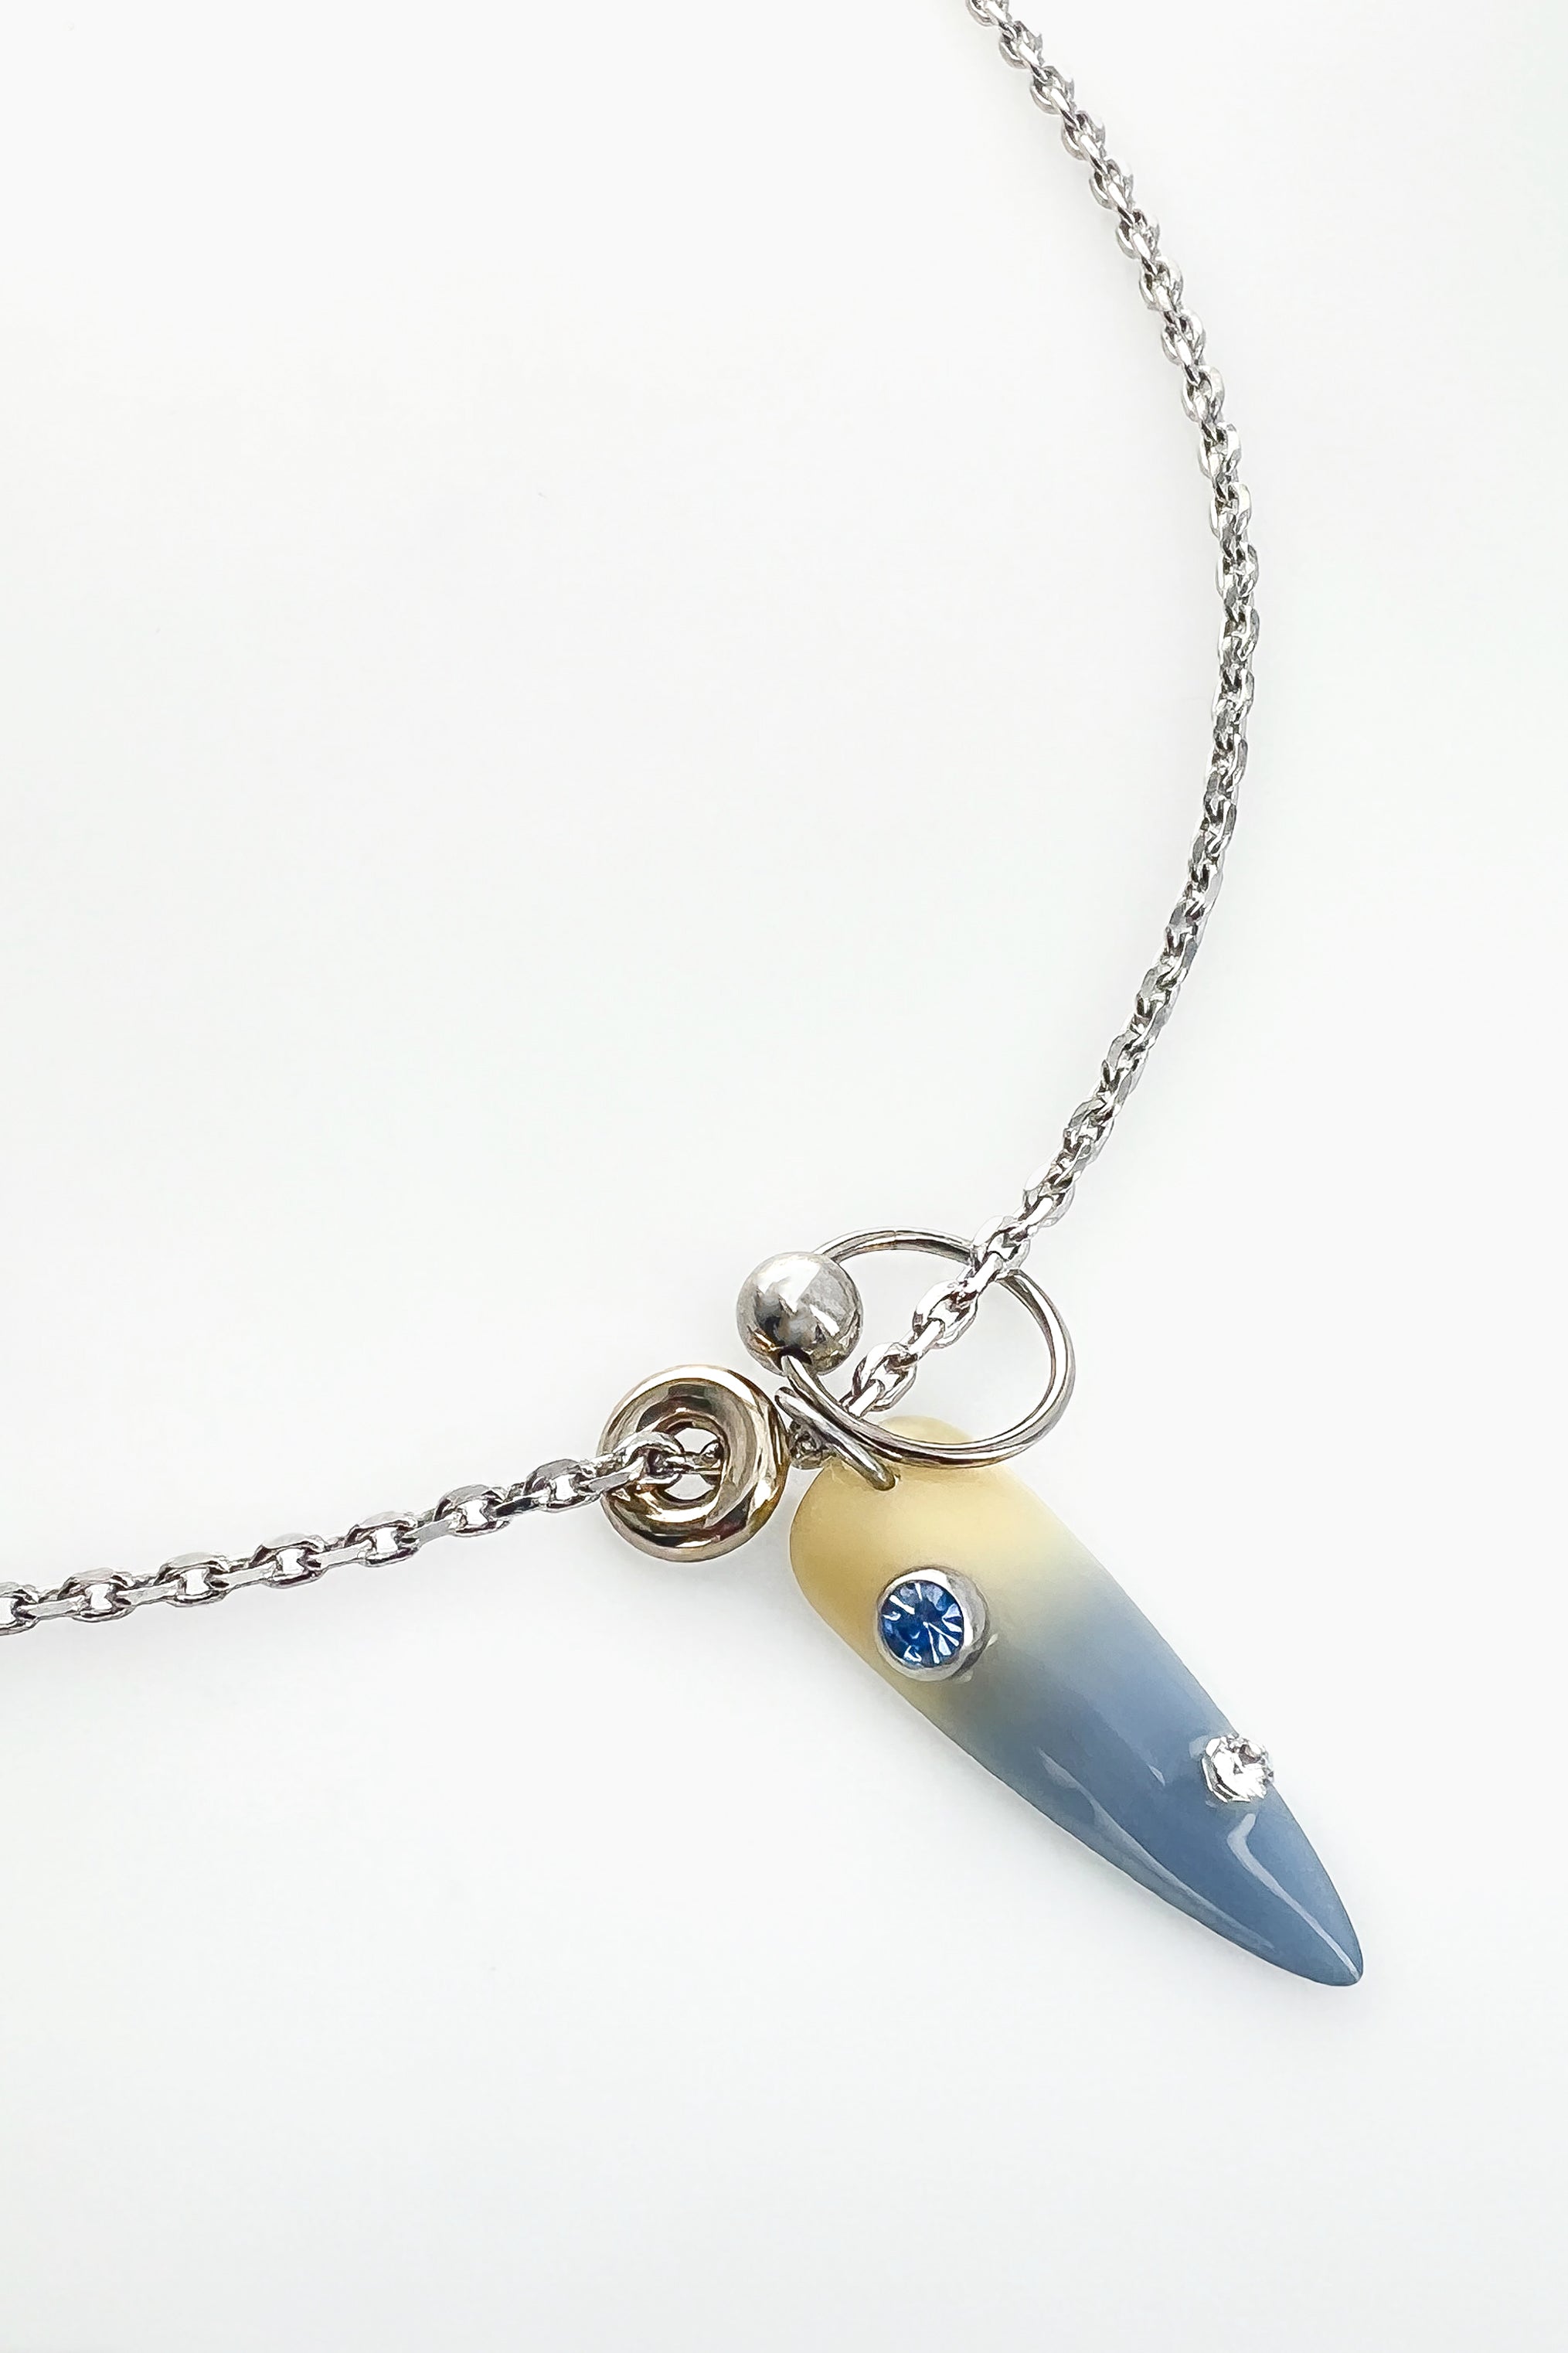 Nail blue necklace